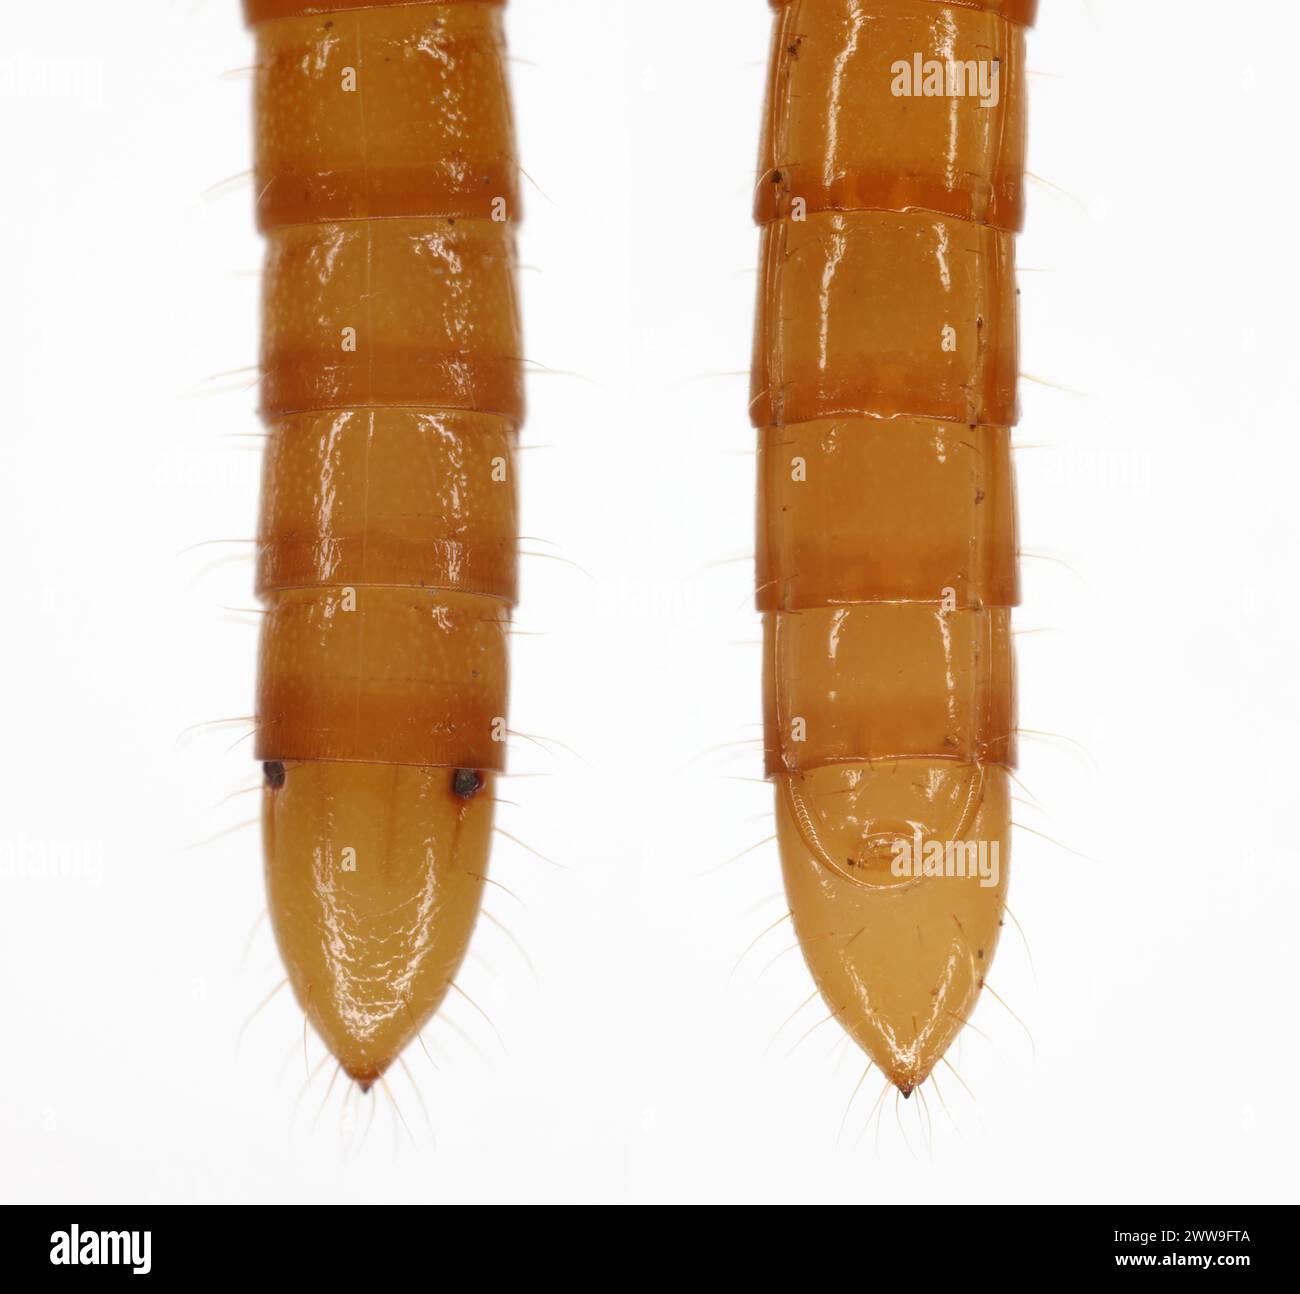 Wireworm Agriotes sp a click beetle larva. Wireworms are  important pests that feed on plant roots. Top and bottom view, back of the body. Stock Photo